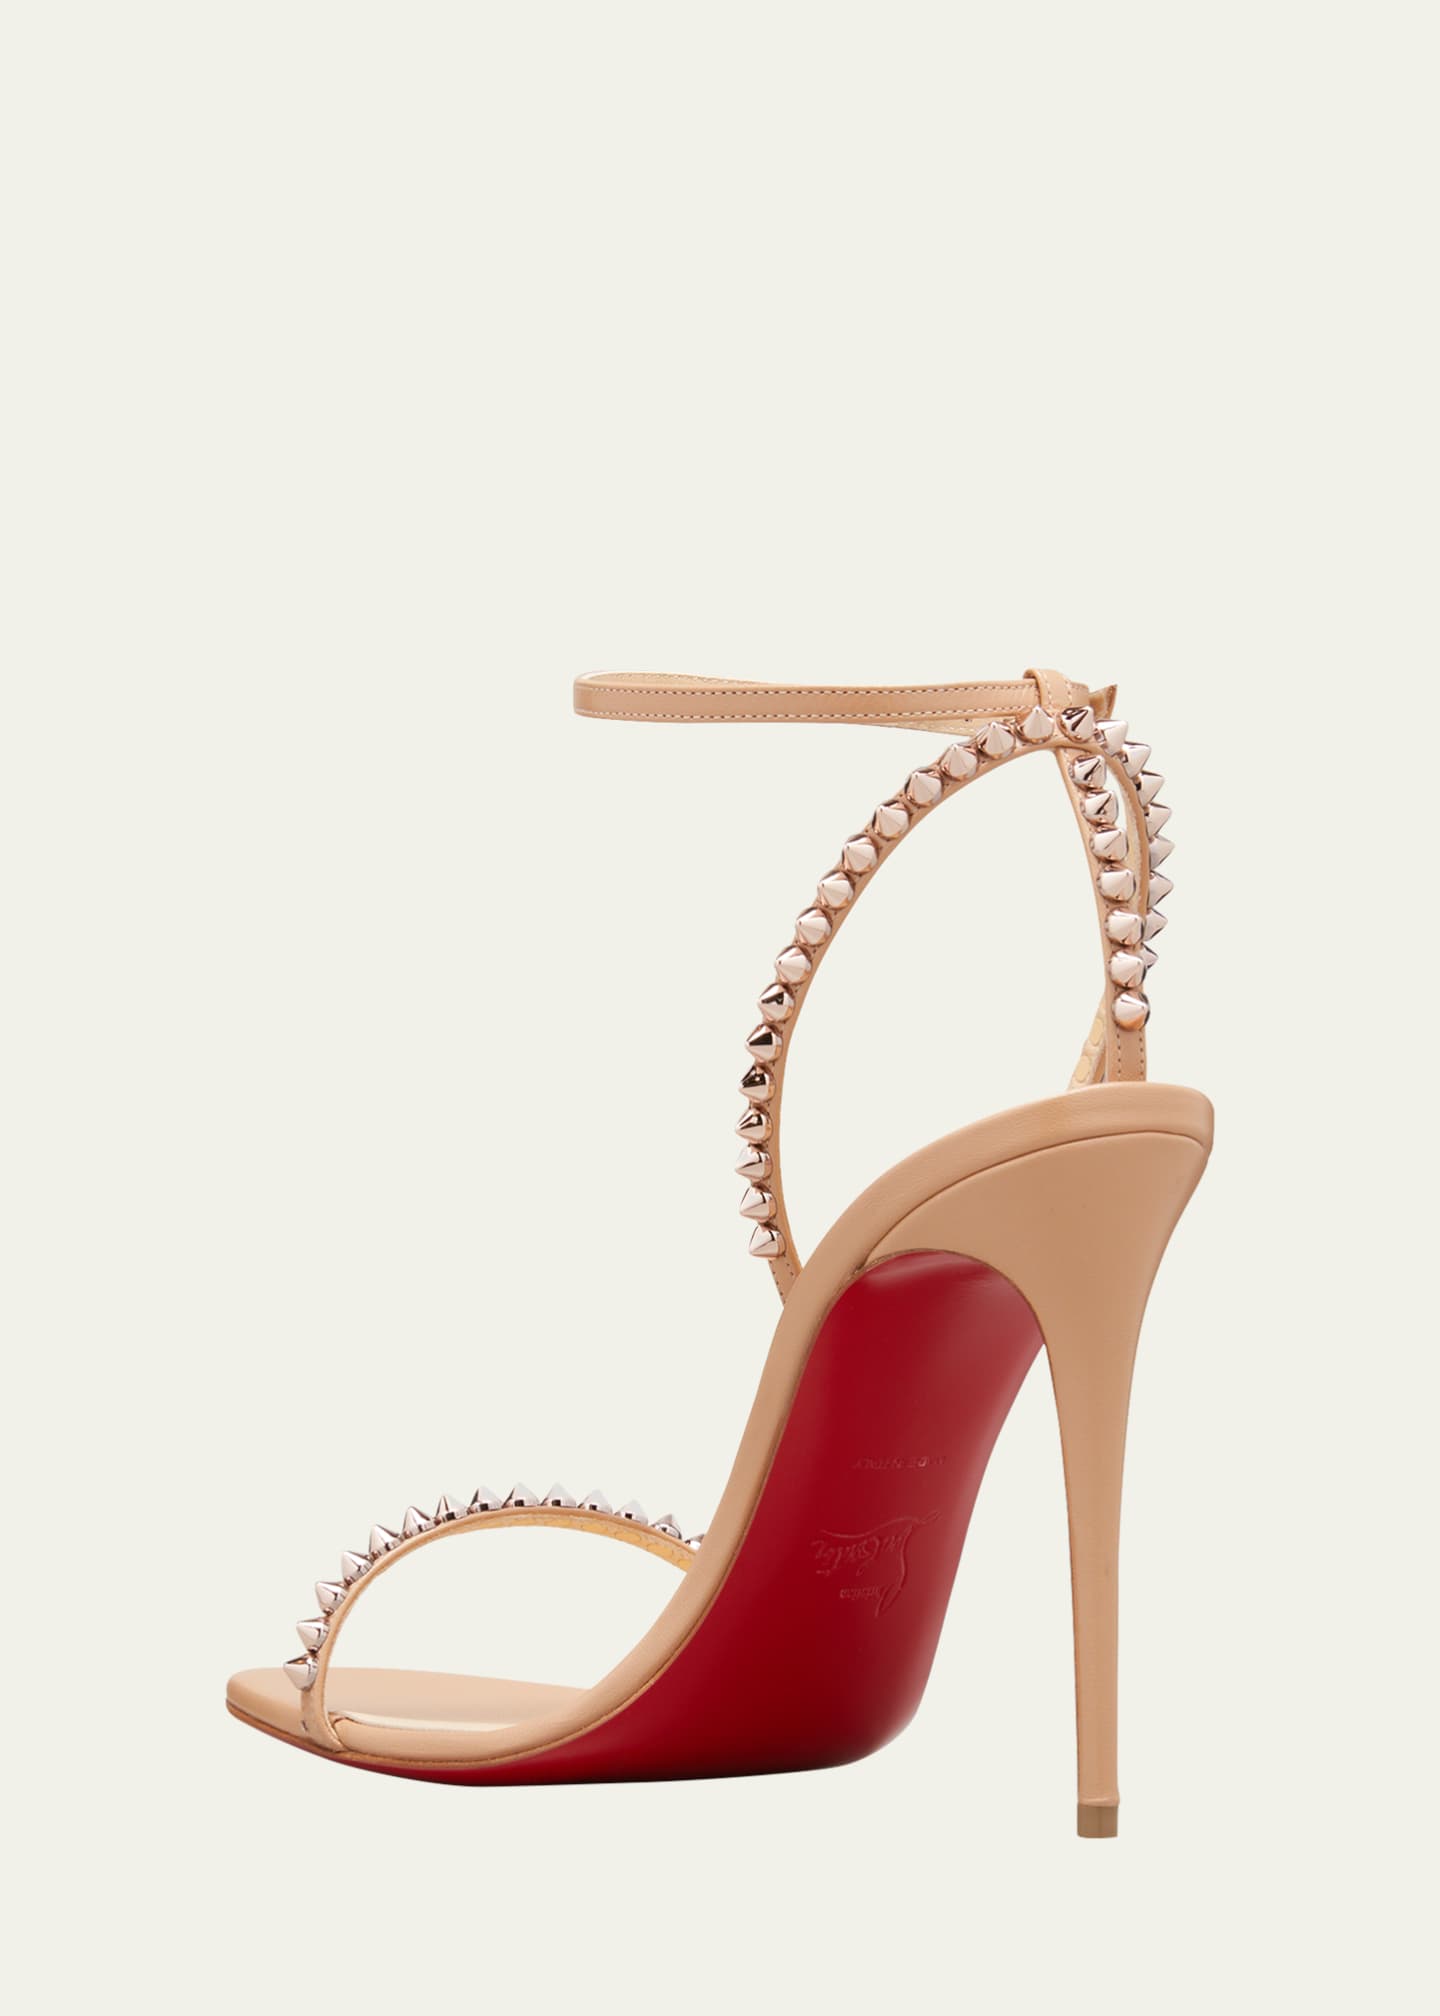 Christian Louboutin So Me Spike Red Sole Sandals